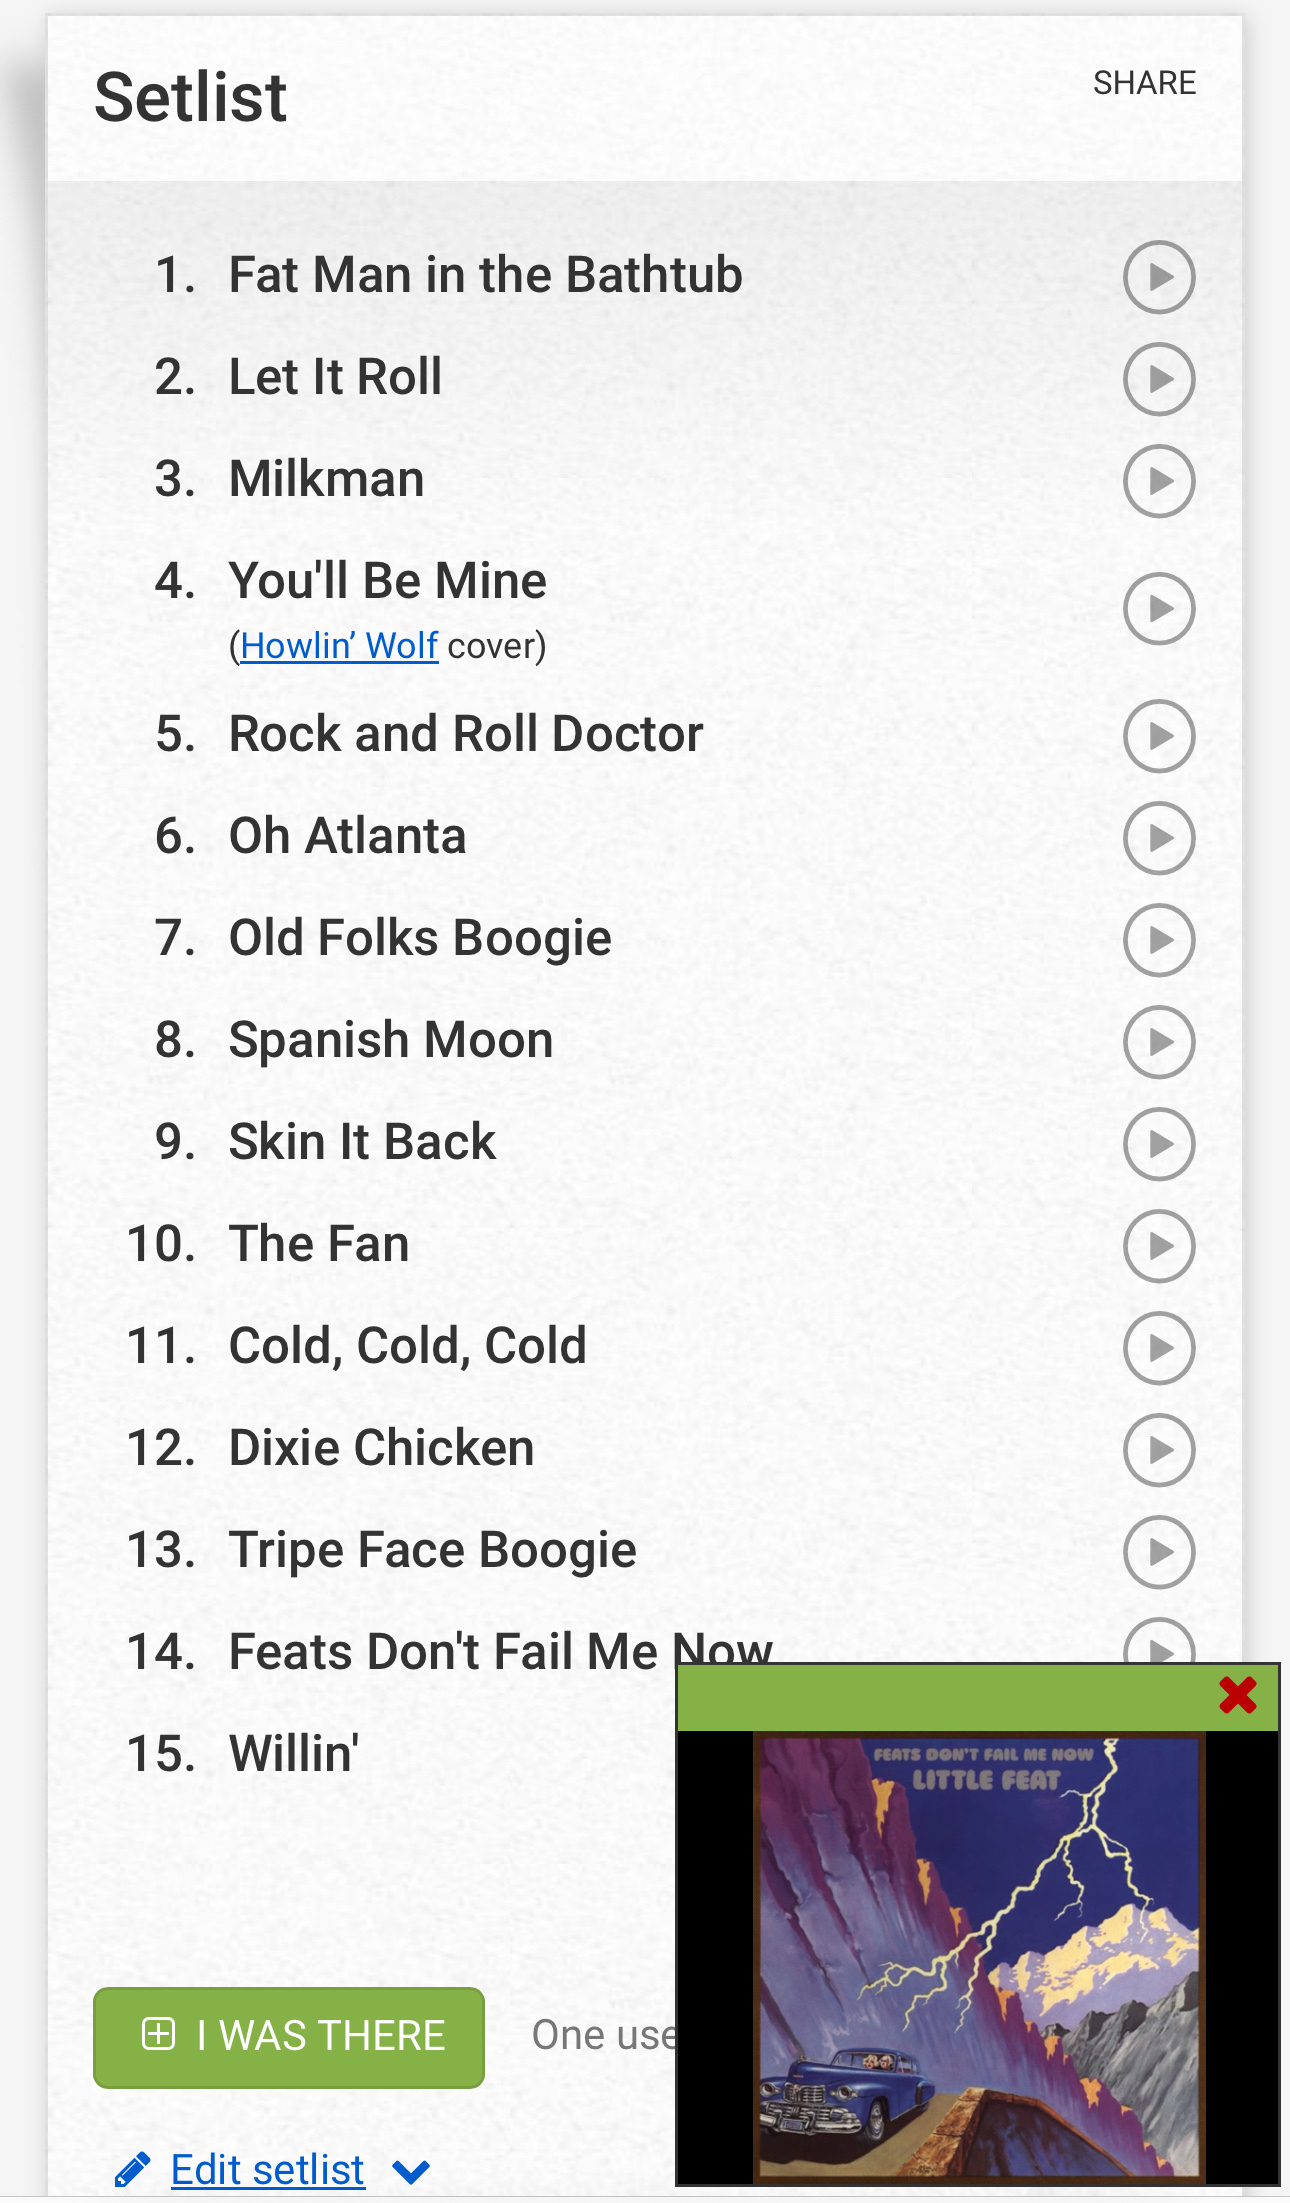 The image shows a concert setlist for a band, featuring 15 songs, with an album cover and buttons for playing each song.